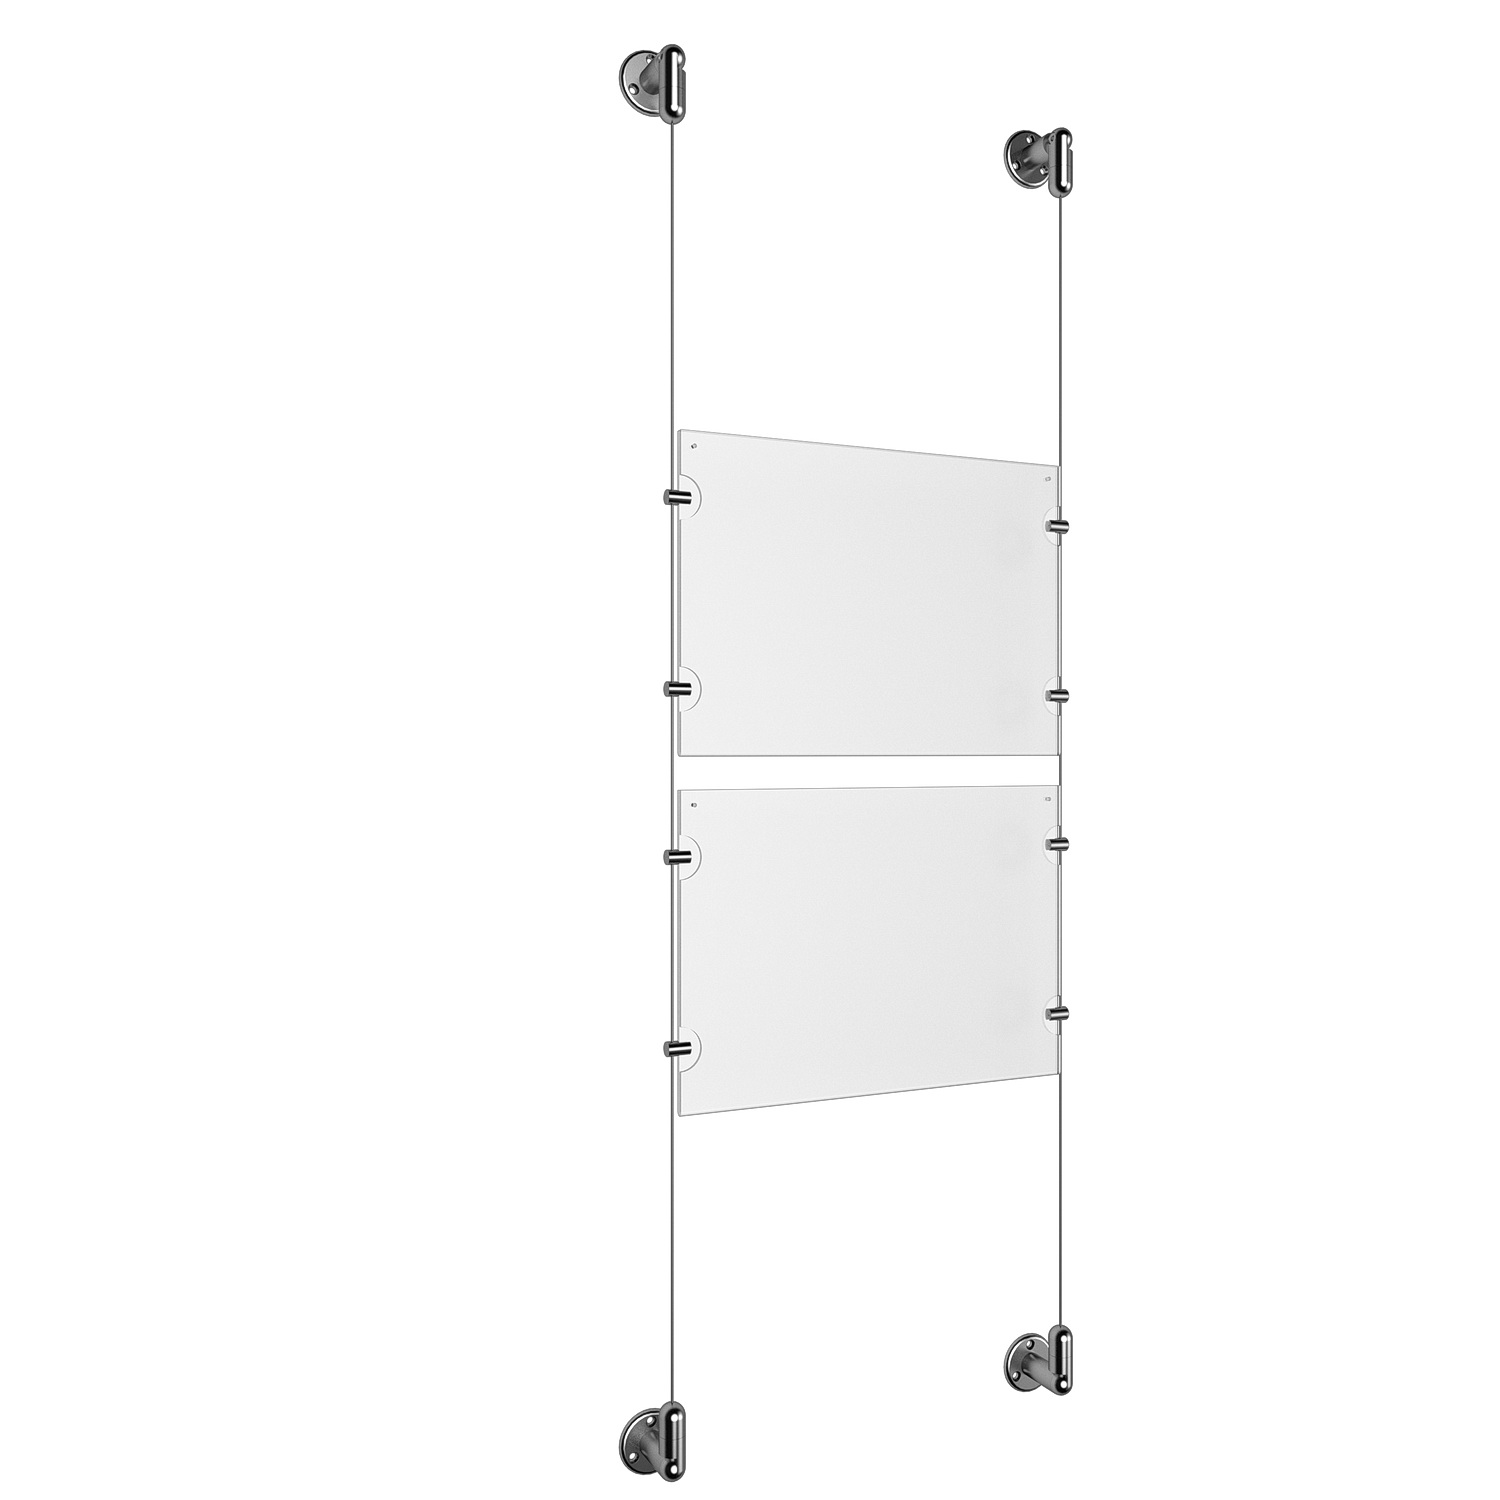 (2) 11'' Width x 8-1/2'' Height Clear Acrylic Frame & (2) Aluminum Clear Anodized Adjustable Angle Cable Systems with (8) Single-Sided Panel Grippers